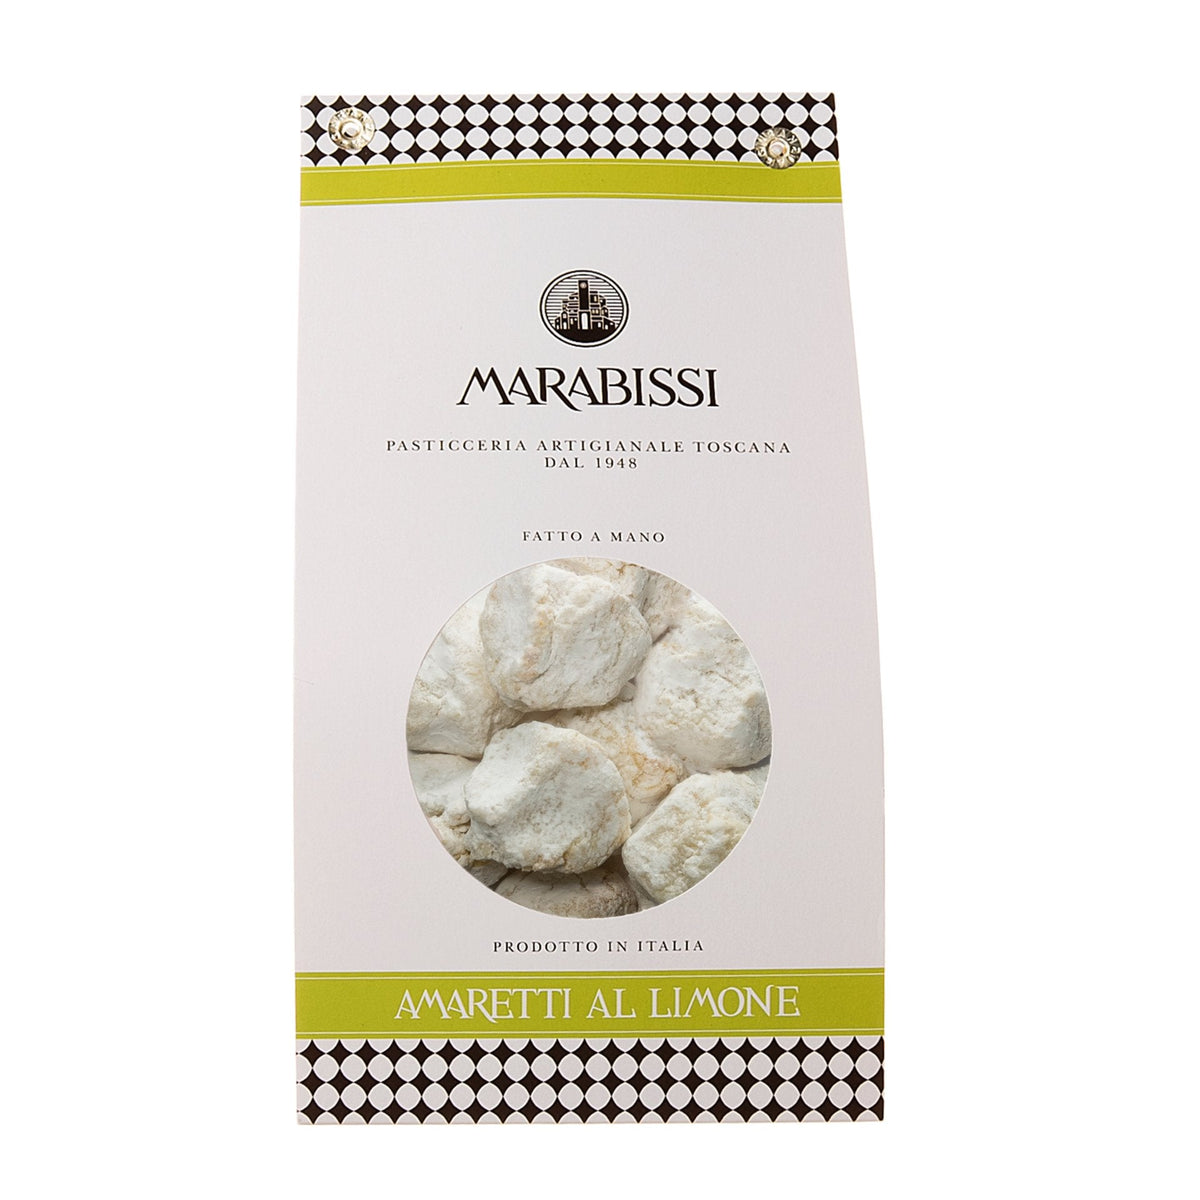 Marabissi Soft Lemon Amaretti (White Bag) 180g  | Imported and distributed in the UK by Just Gourmet Foods